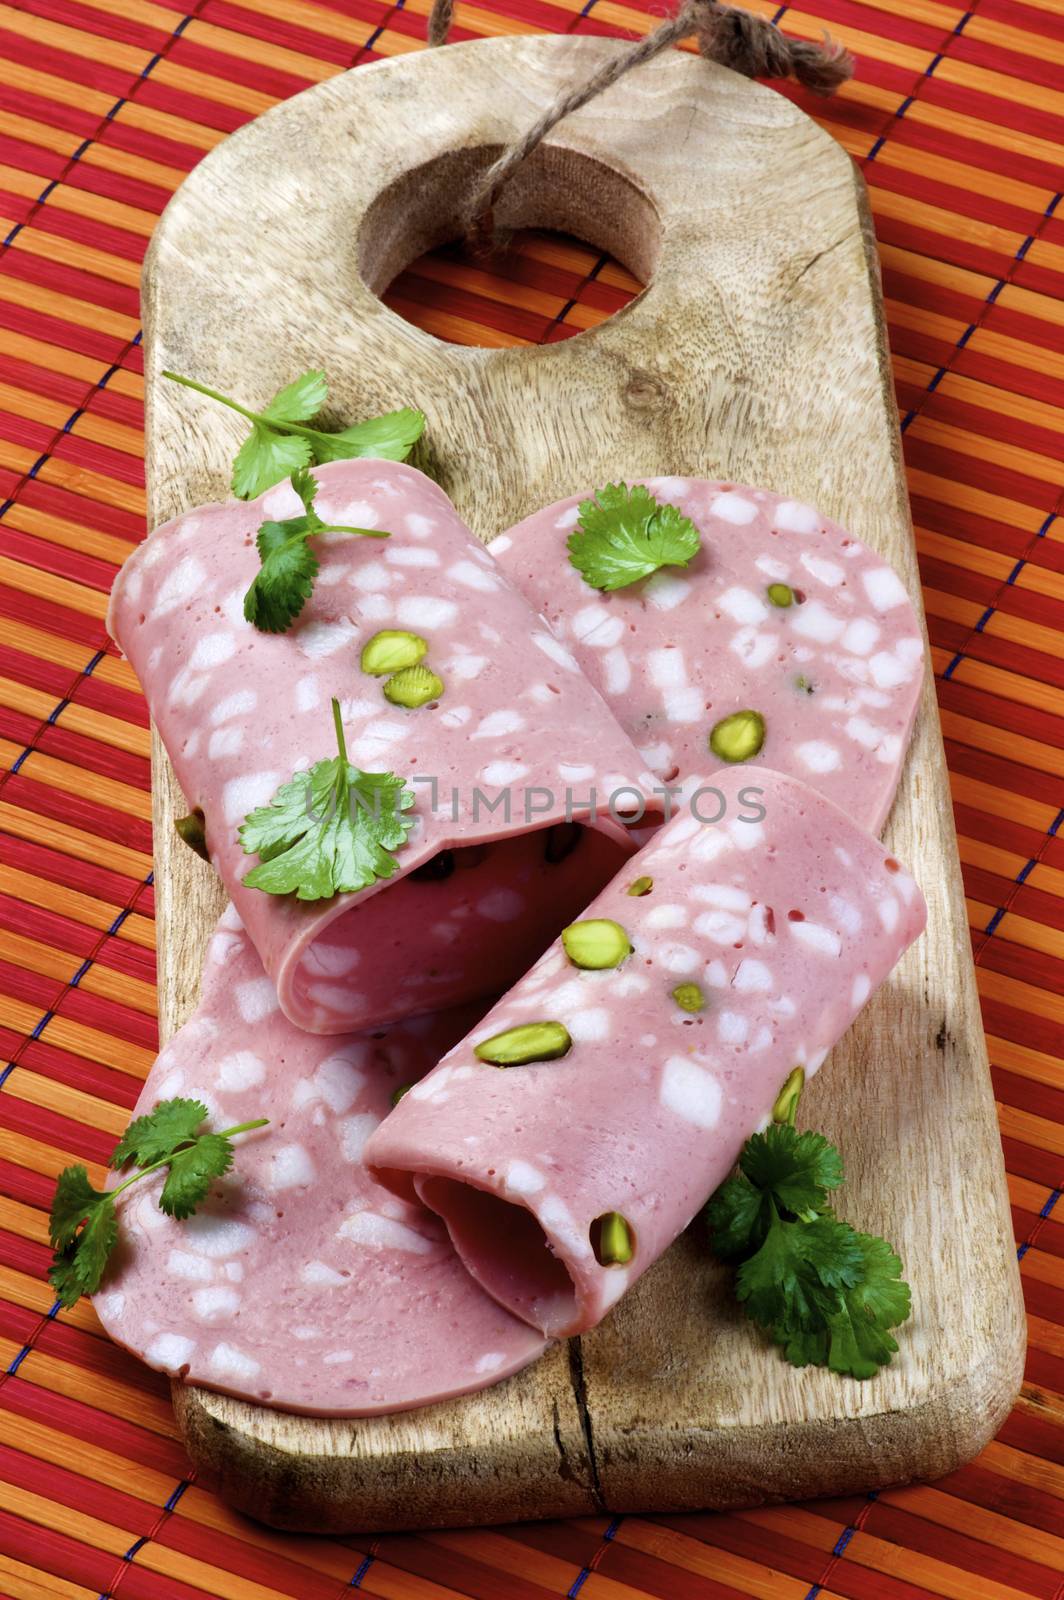 Slices of Delicious Fresh Mortadella with Pistachio and Greens on Wooden Cutting Board closeup on Straw mat background